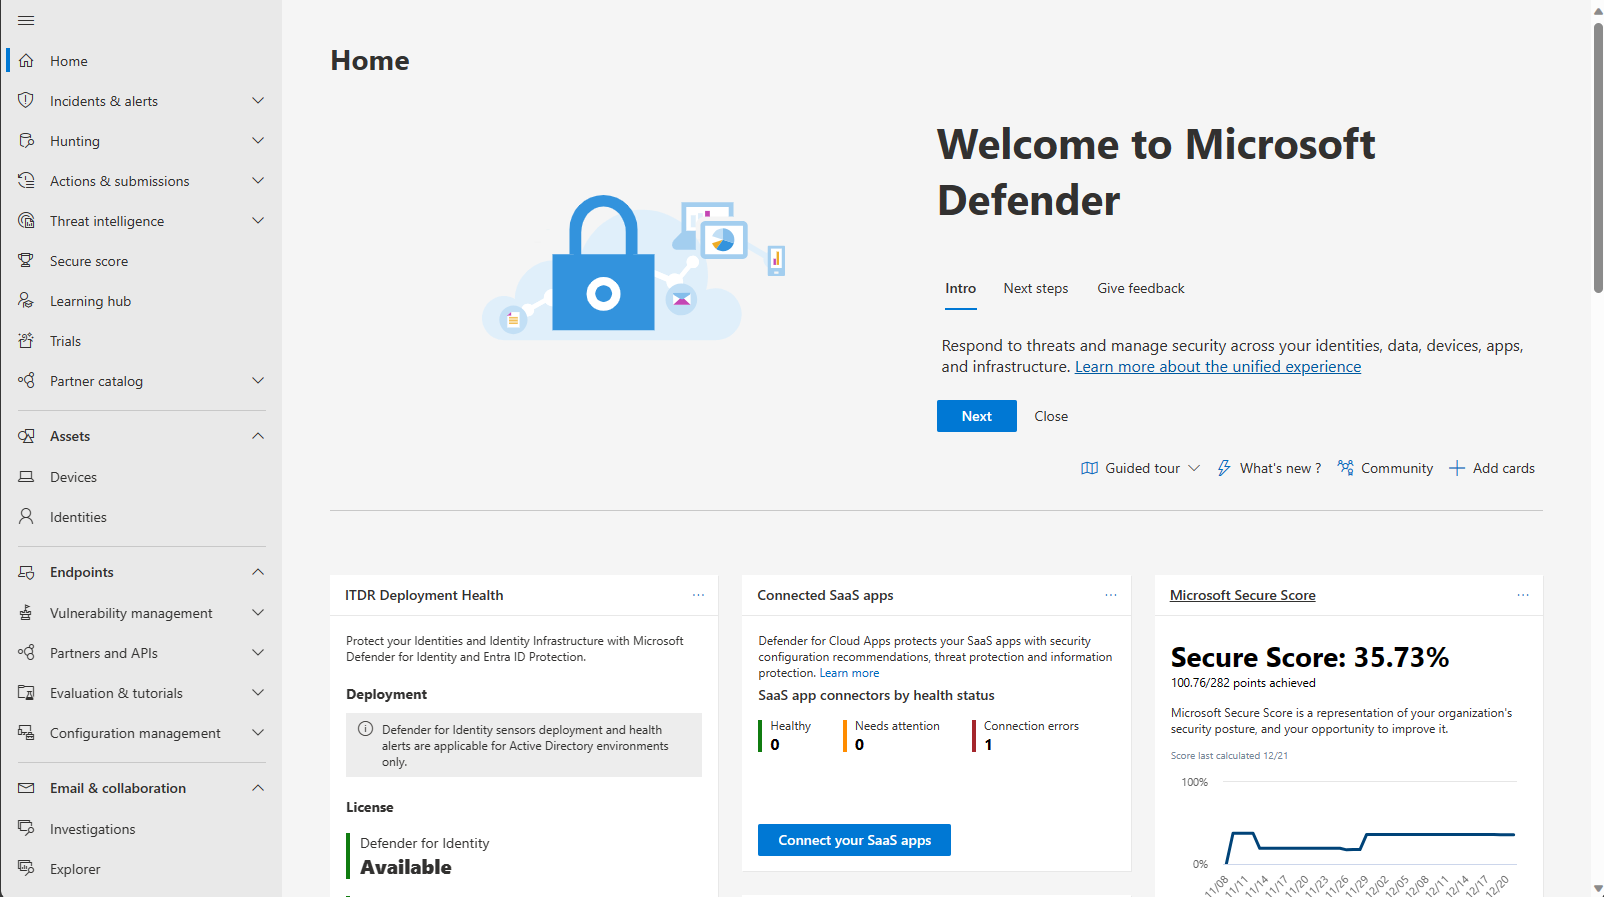 A screenshot of the Microsoft Defender portal home page.